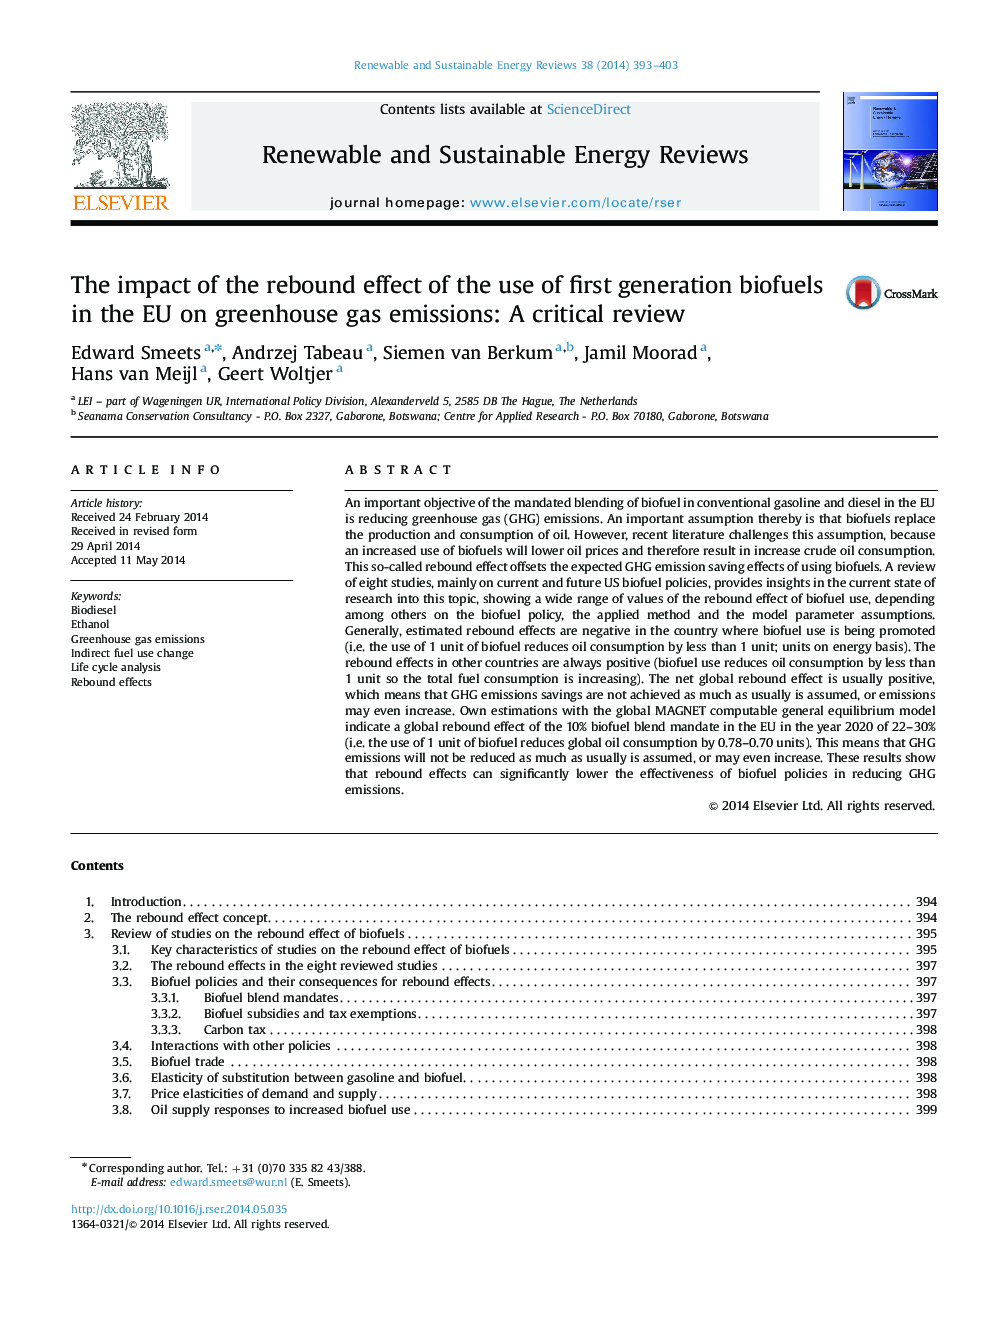 The impact of the rebound effect of the use of first generation biofuels in the EU on greenhouse gas emissions: A critical review